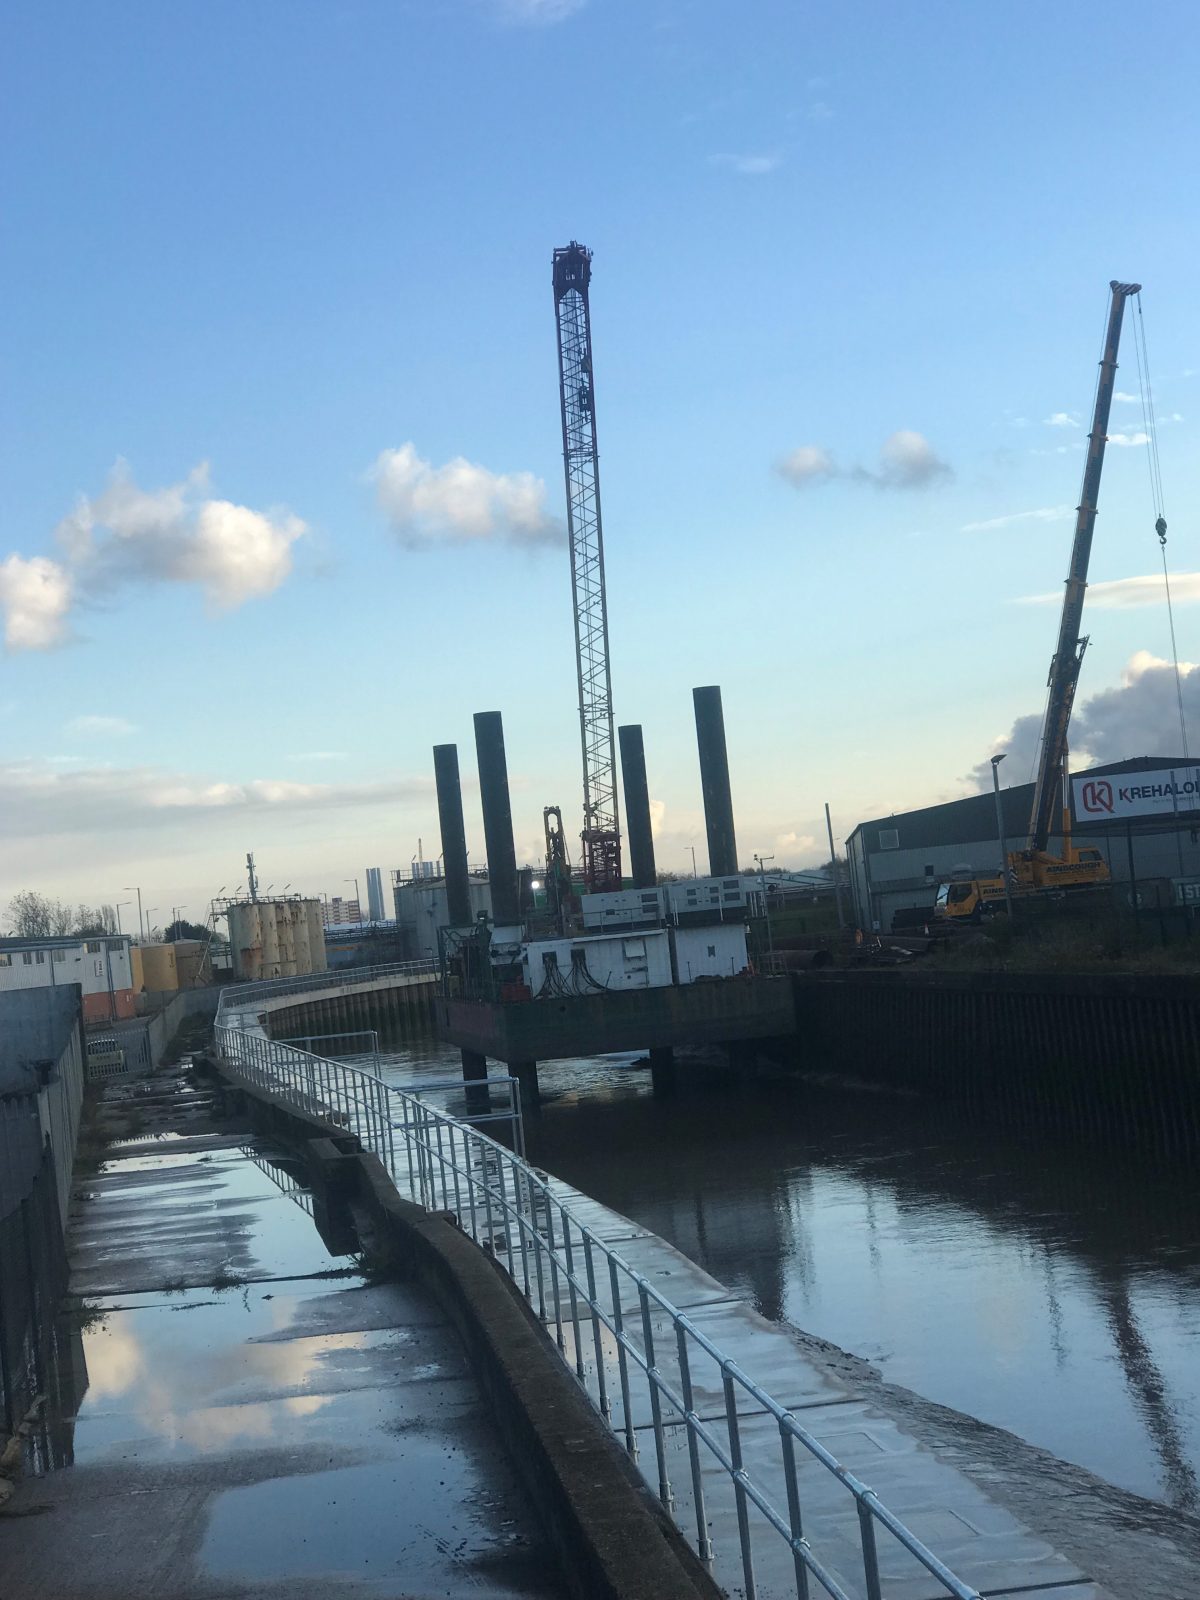 RED7MARINE SUPPLIES THE HAVEN SEARISER FOR THE RIVER HULL RECONFIGURATION